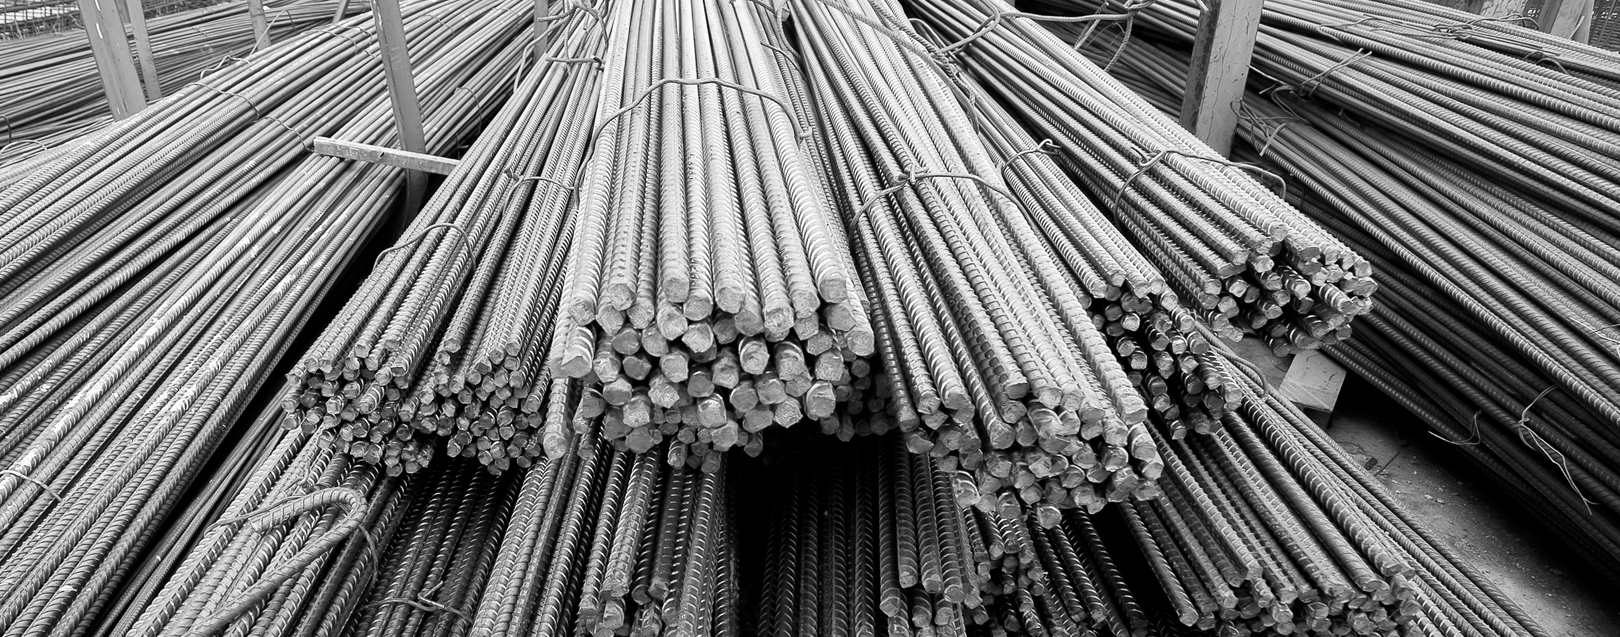 Govt imposes anti-dumping duty on imports of rods and bars from China